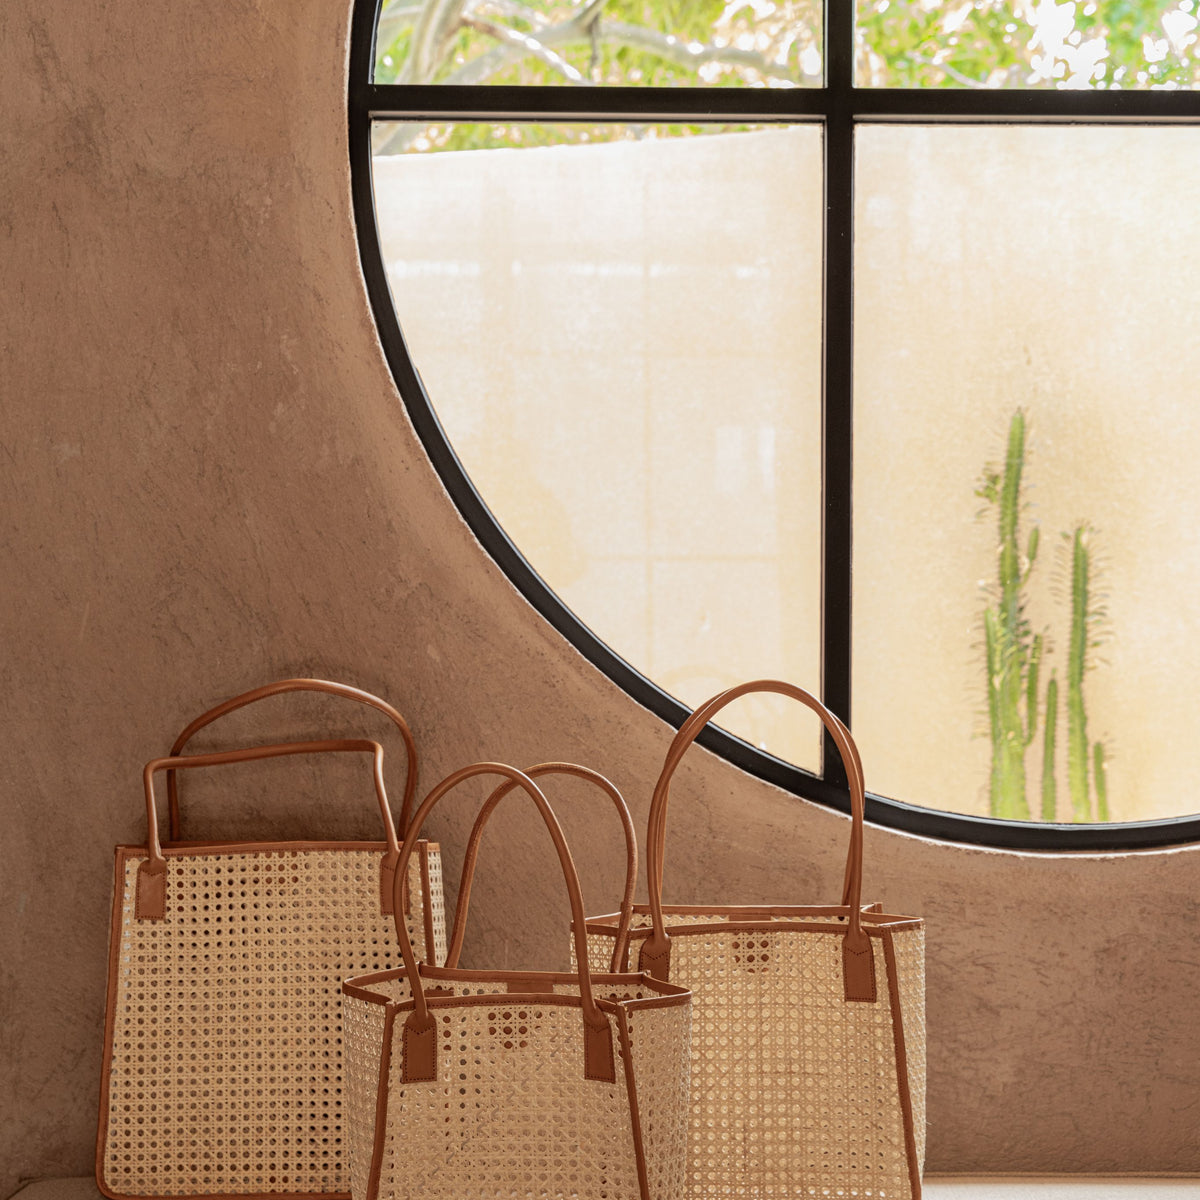 Citra Leather and Rattan Tote Bag PREORDER